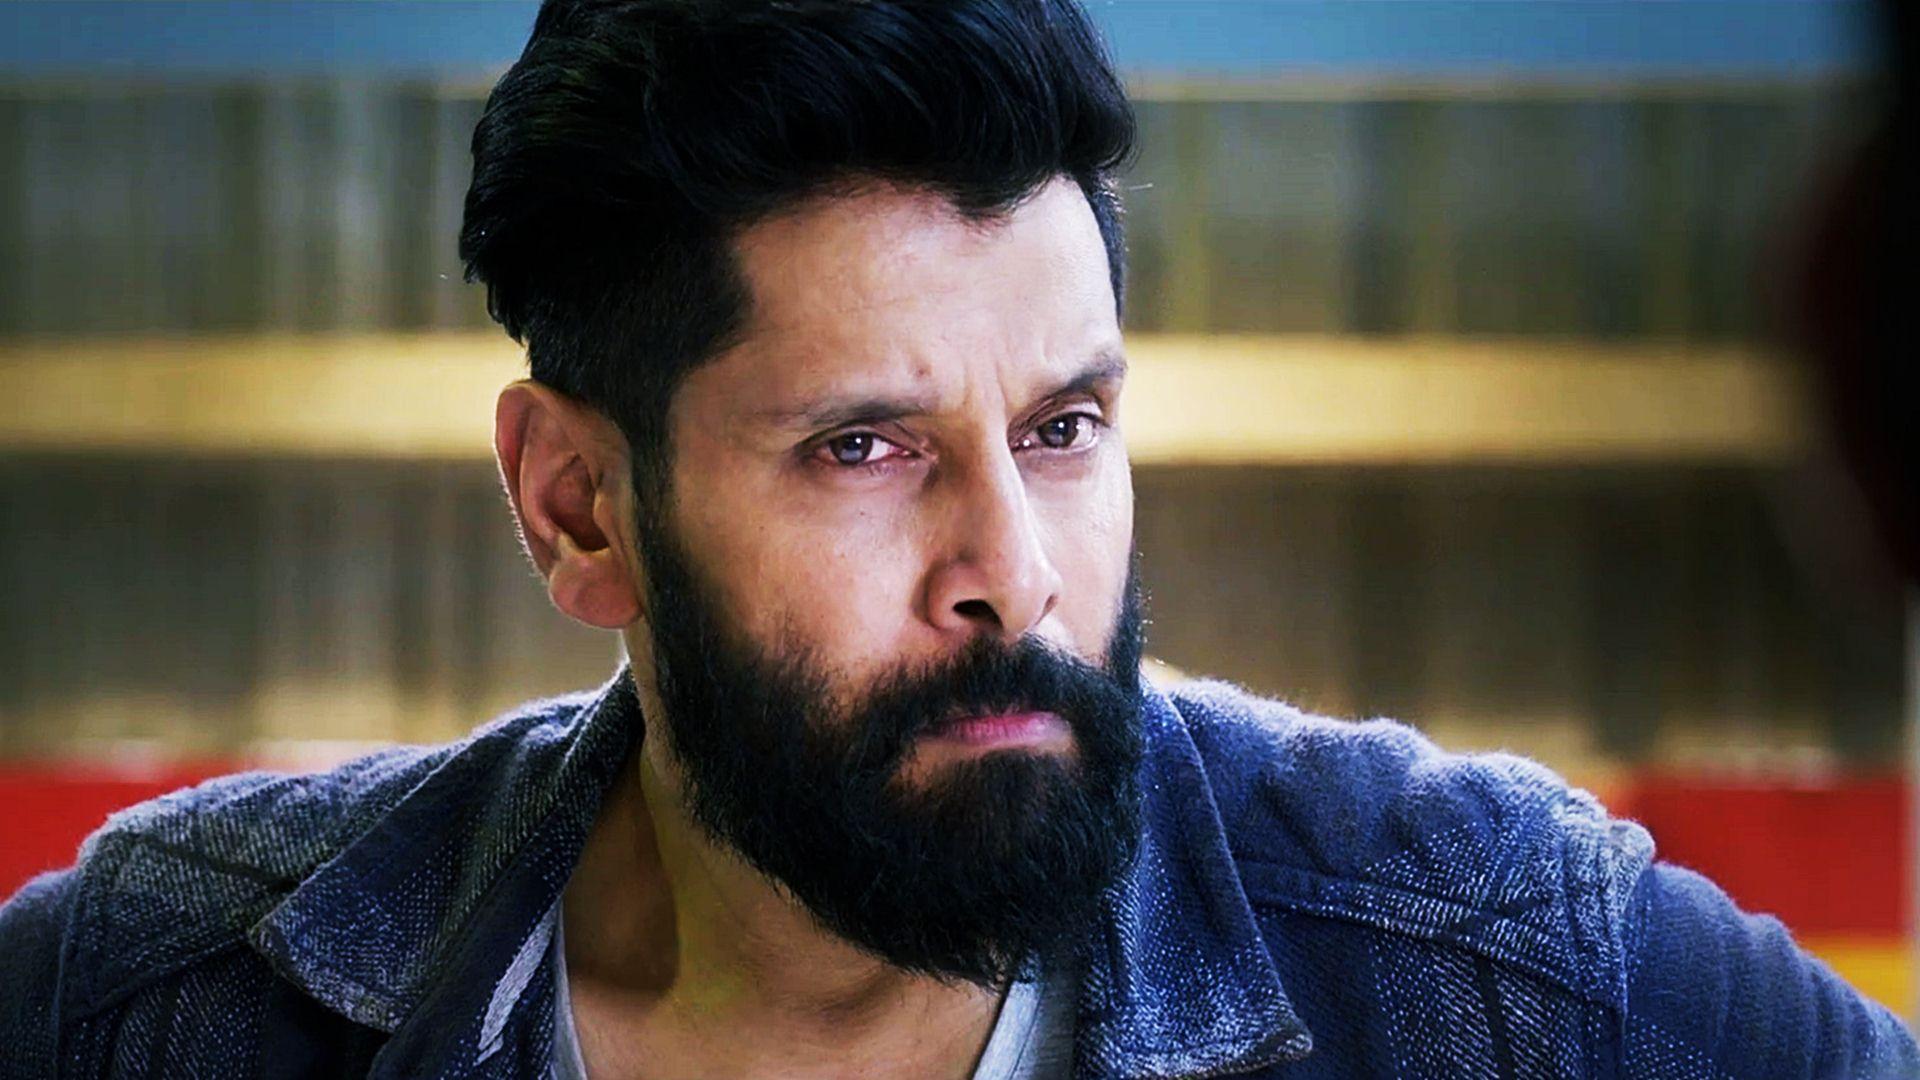 SS MUSIC - An Actor, #Chiyaan #Vikram says Is Better Than Him ! read more  http://www.ssmusic.tv/chiyaan-says-this-actor-is-better-than-him/ | Facebook